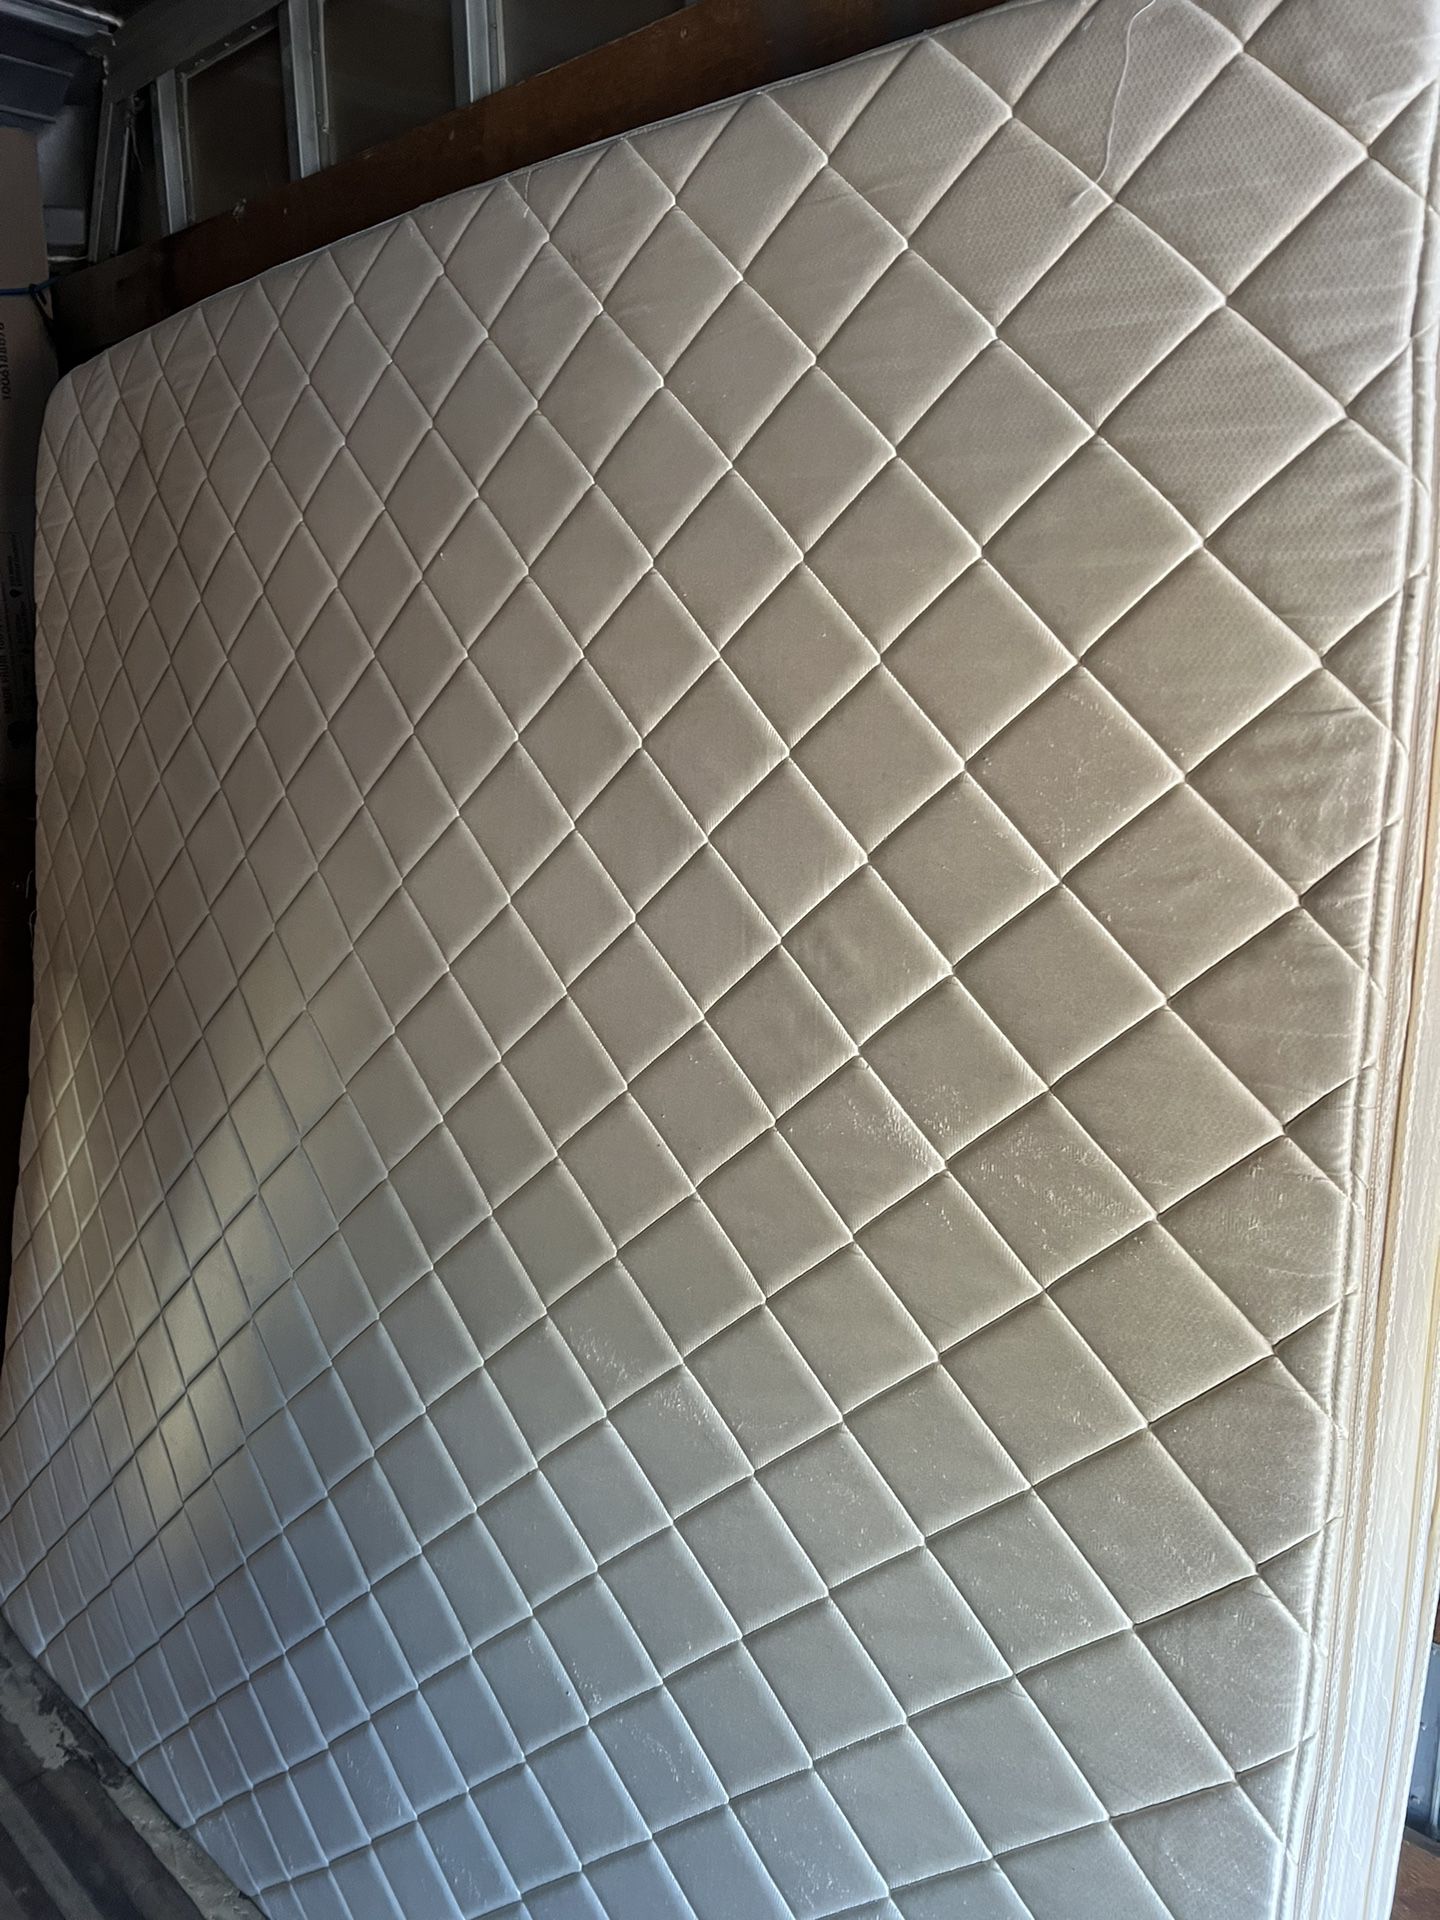 King Size Mattress With Box Springs And Frame.